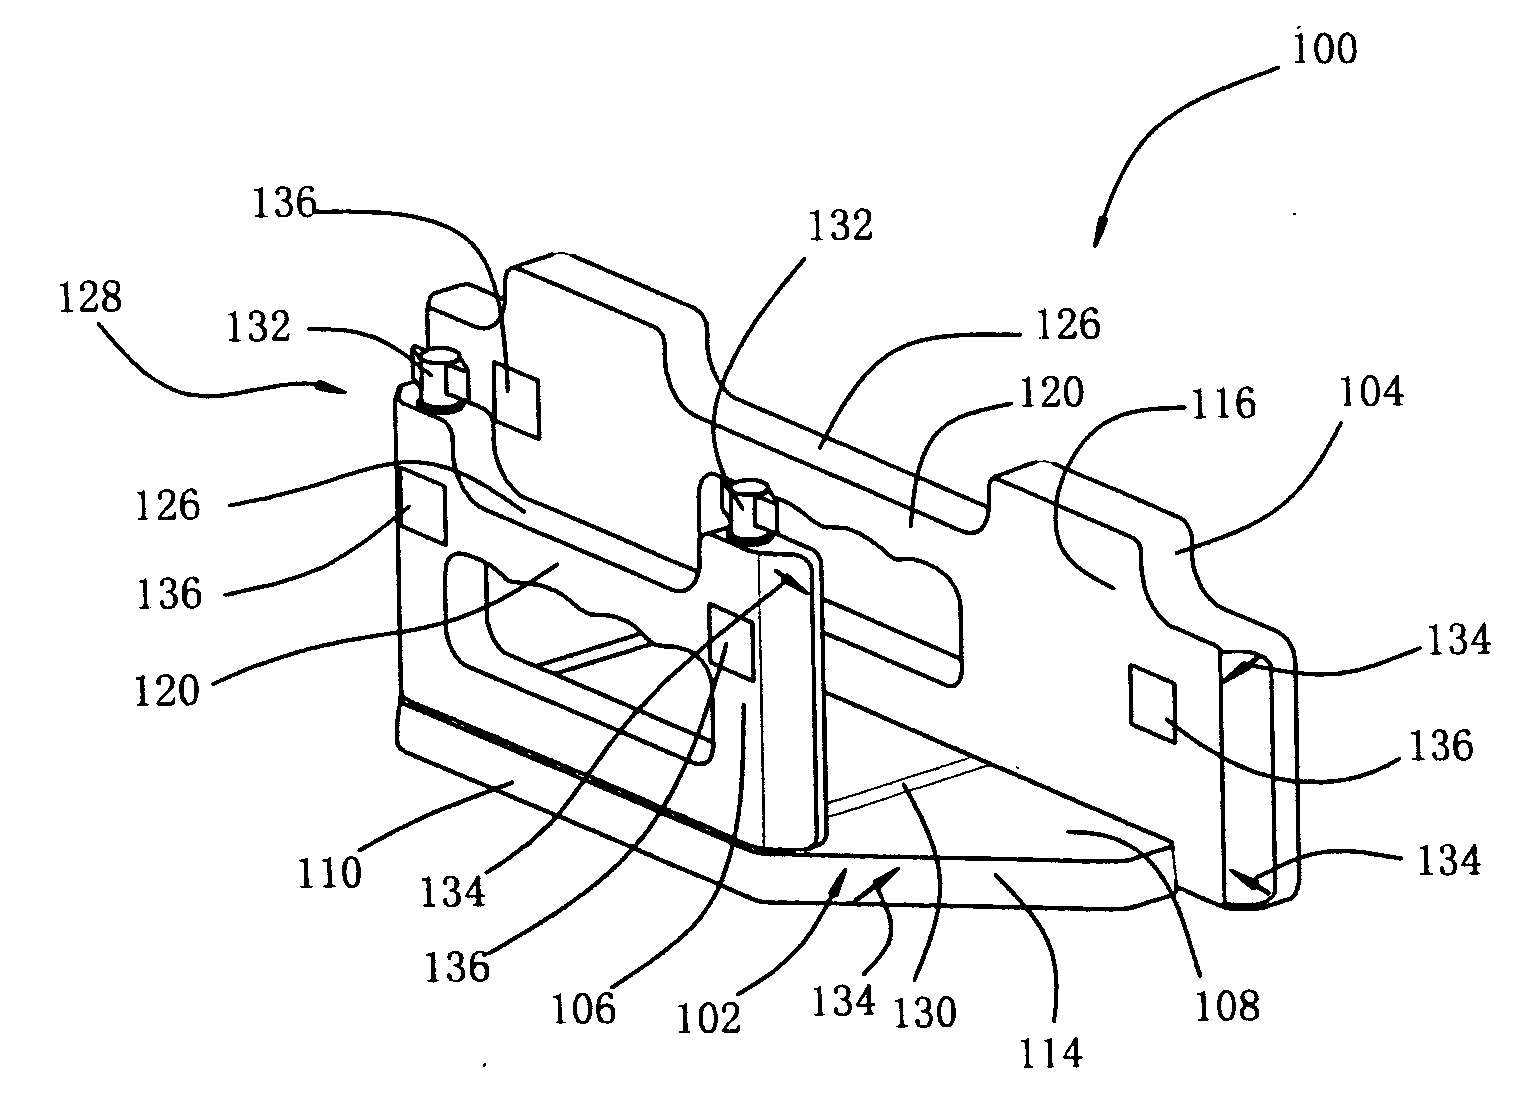 Device for positioning a workpiece to be cut and a method of using the same